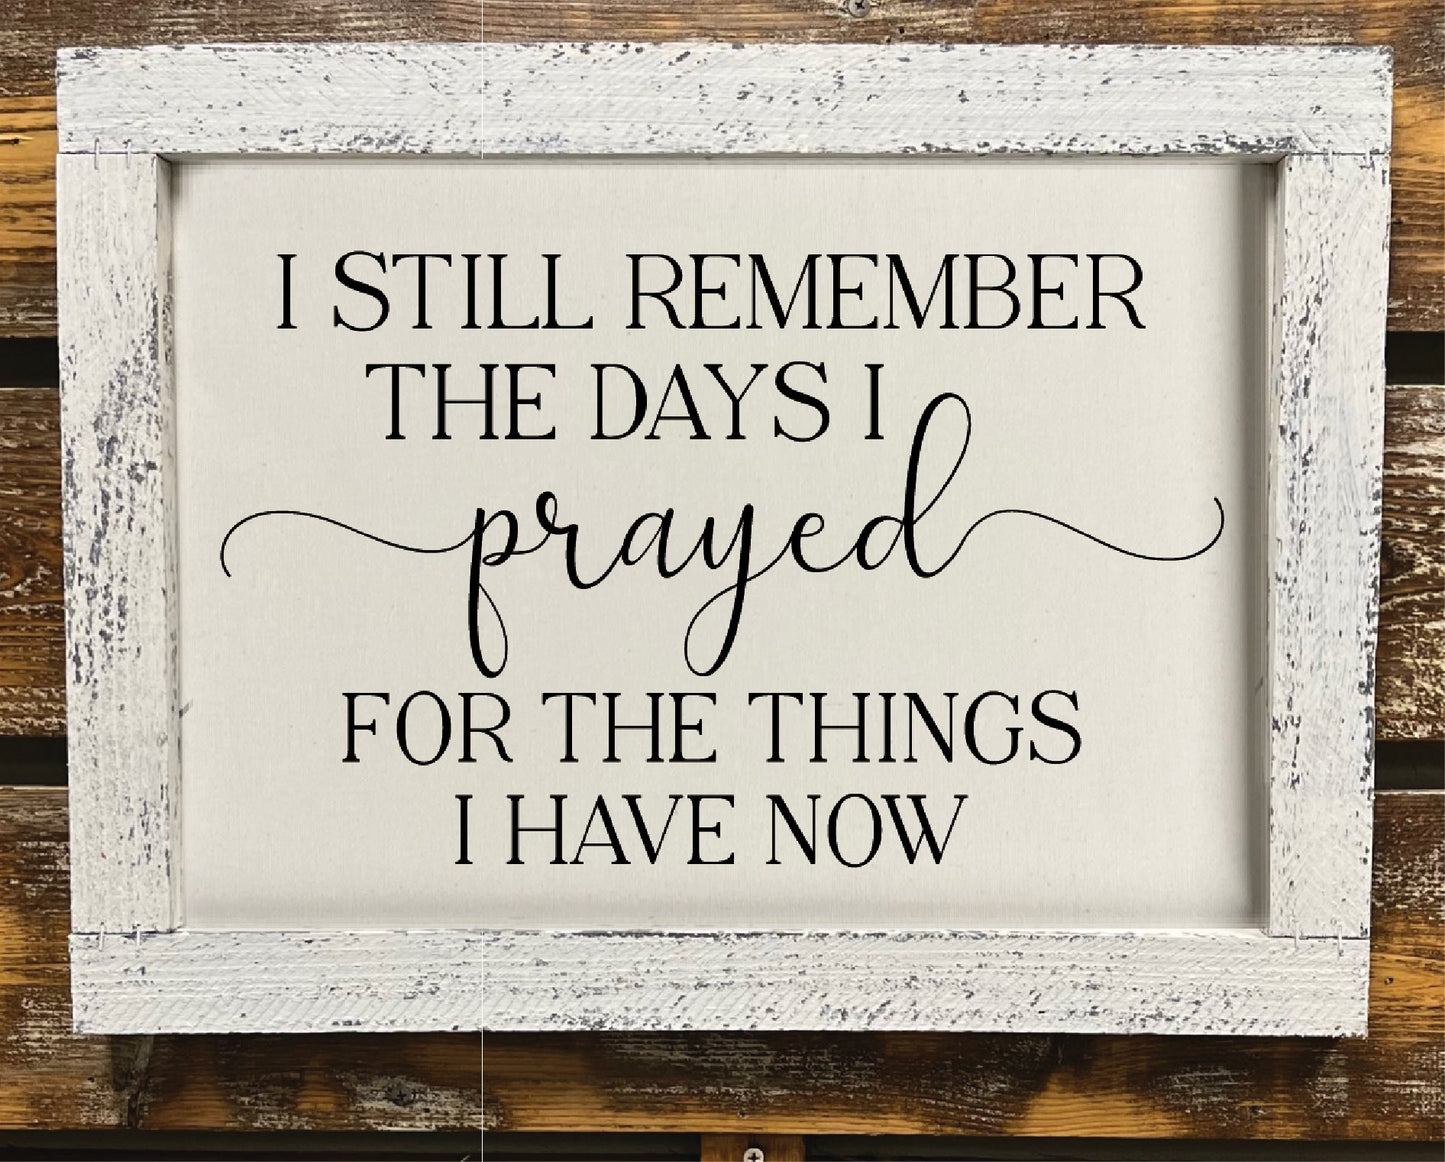 I Still Remember The Days I Prayed For The Things I Have Now